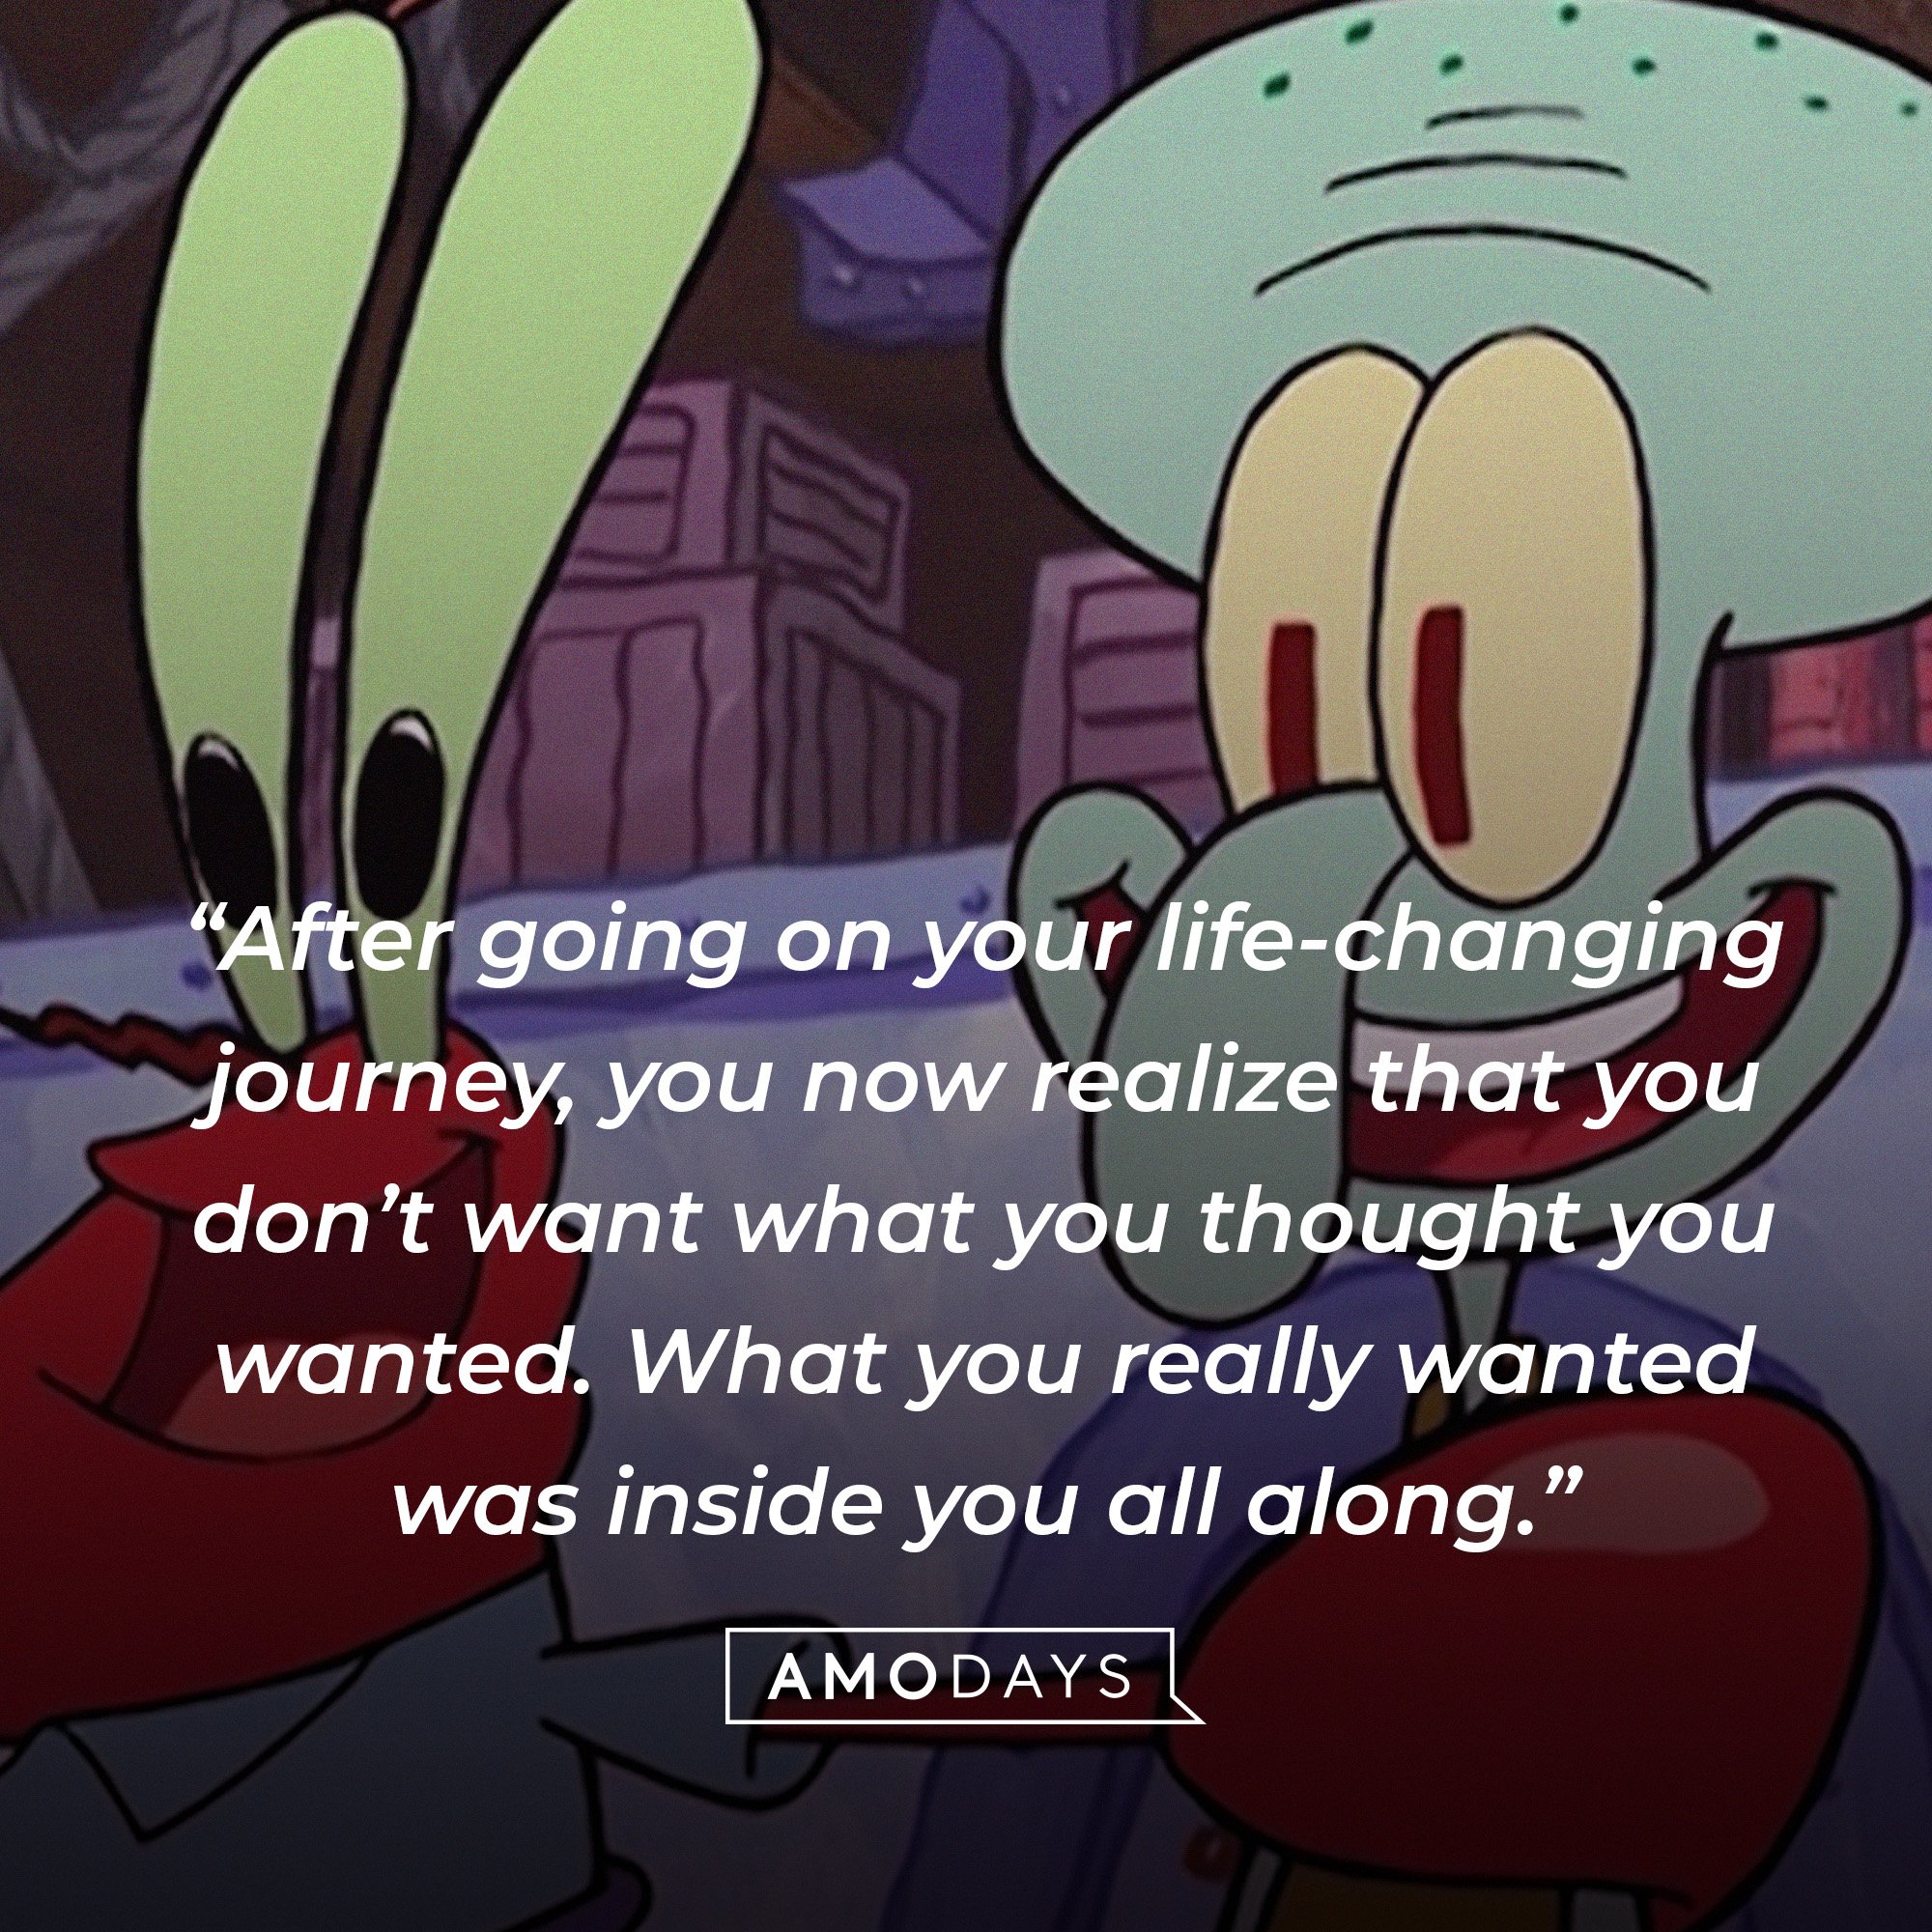  Squidward Tentacles’ quote: “After going on your life-changing journey, you now realize that you don’t want what you thought you wanted. What you really wanted was inside you all along.” | Source: AmoDays